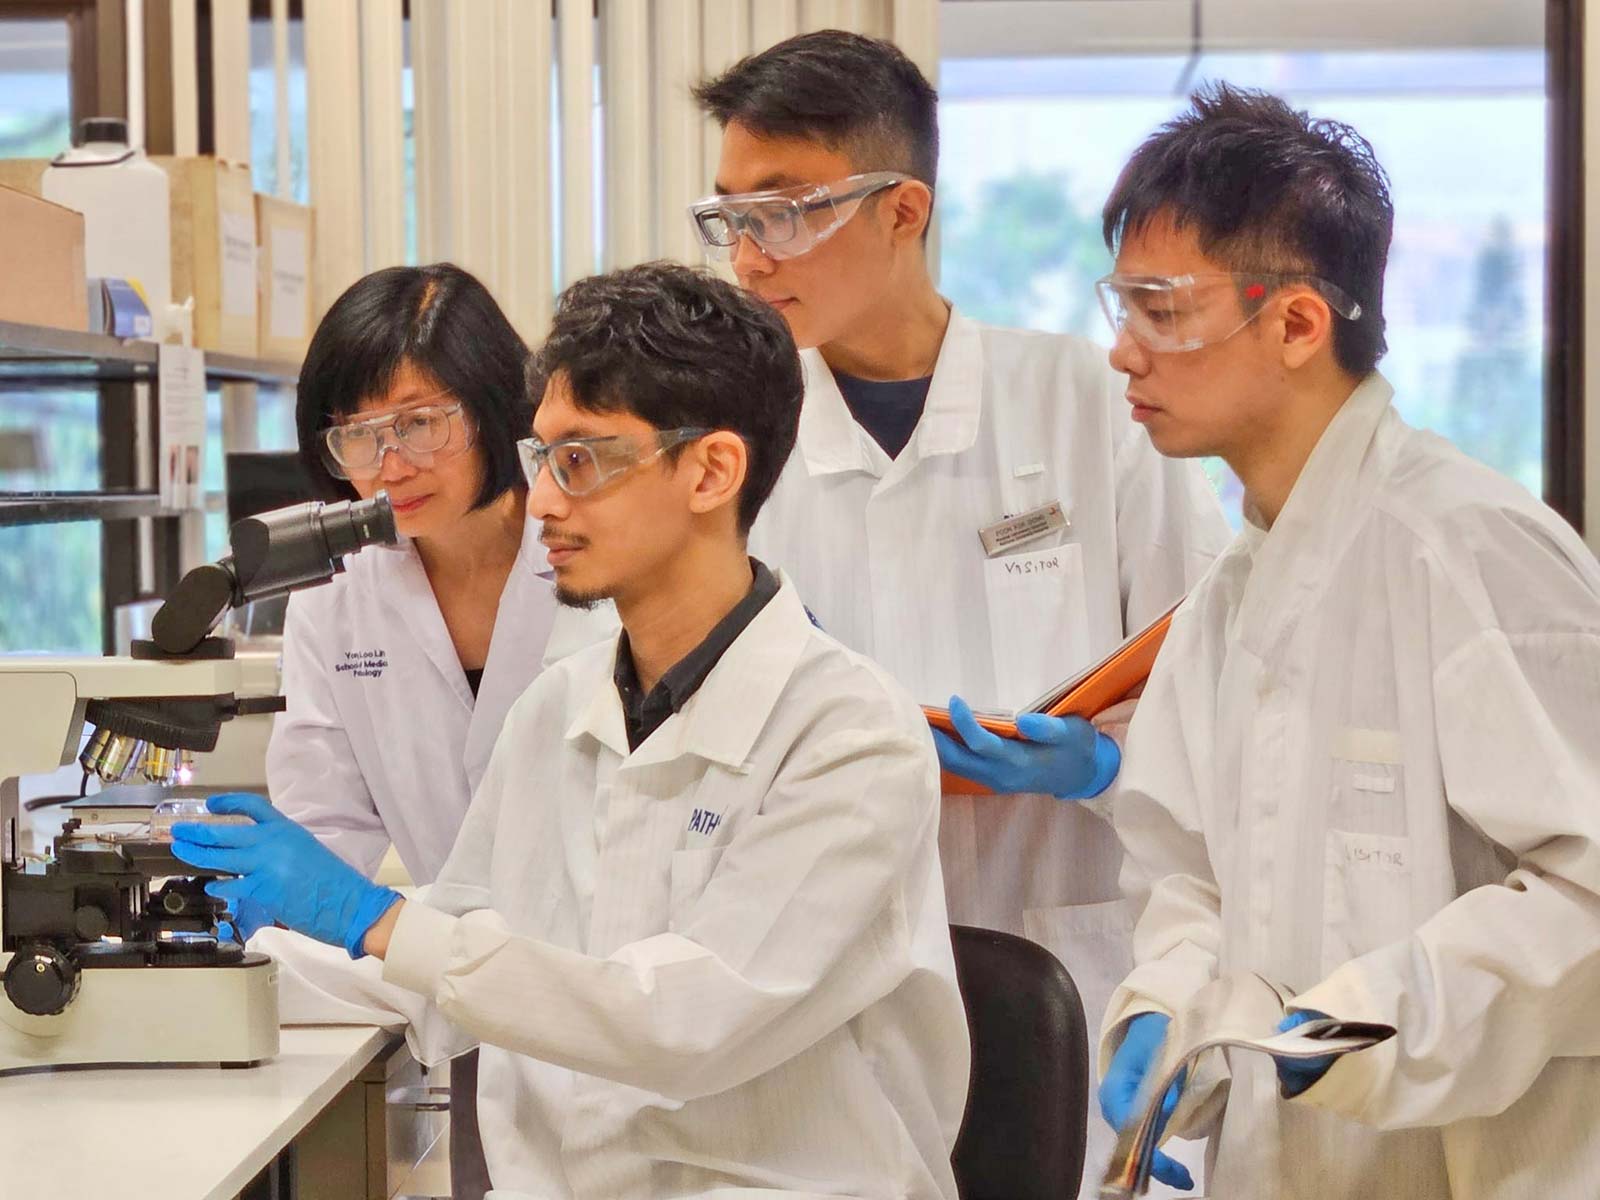 Research team members from Asst Prof Leong Sai Mun’s lab, examining the cell culture plates with co-culture experiment, which led to the discovery of cancer cell altruism. (From left to right: Dr Tan Yuen Peng, Dr Muhammad Sufyan, PhD student Poon Kok Siong, Dr Leong Sai Mun)